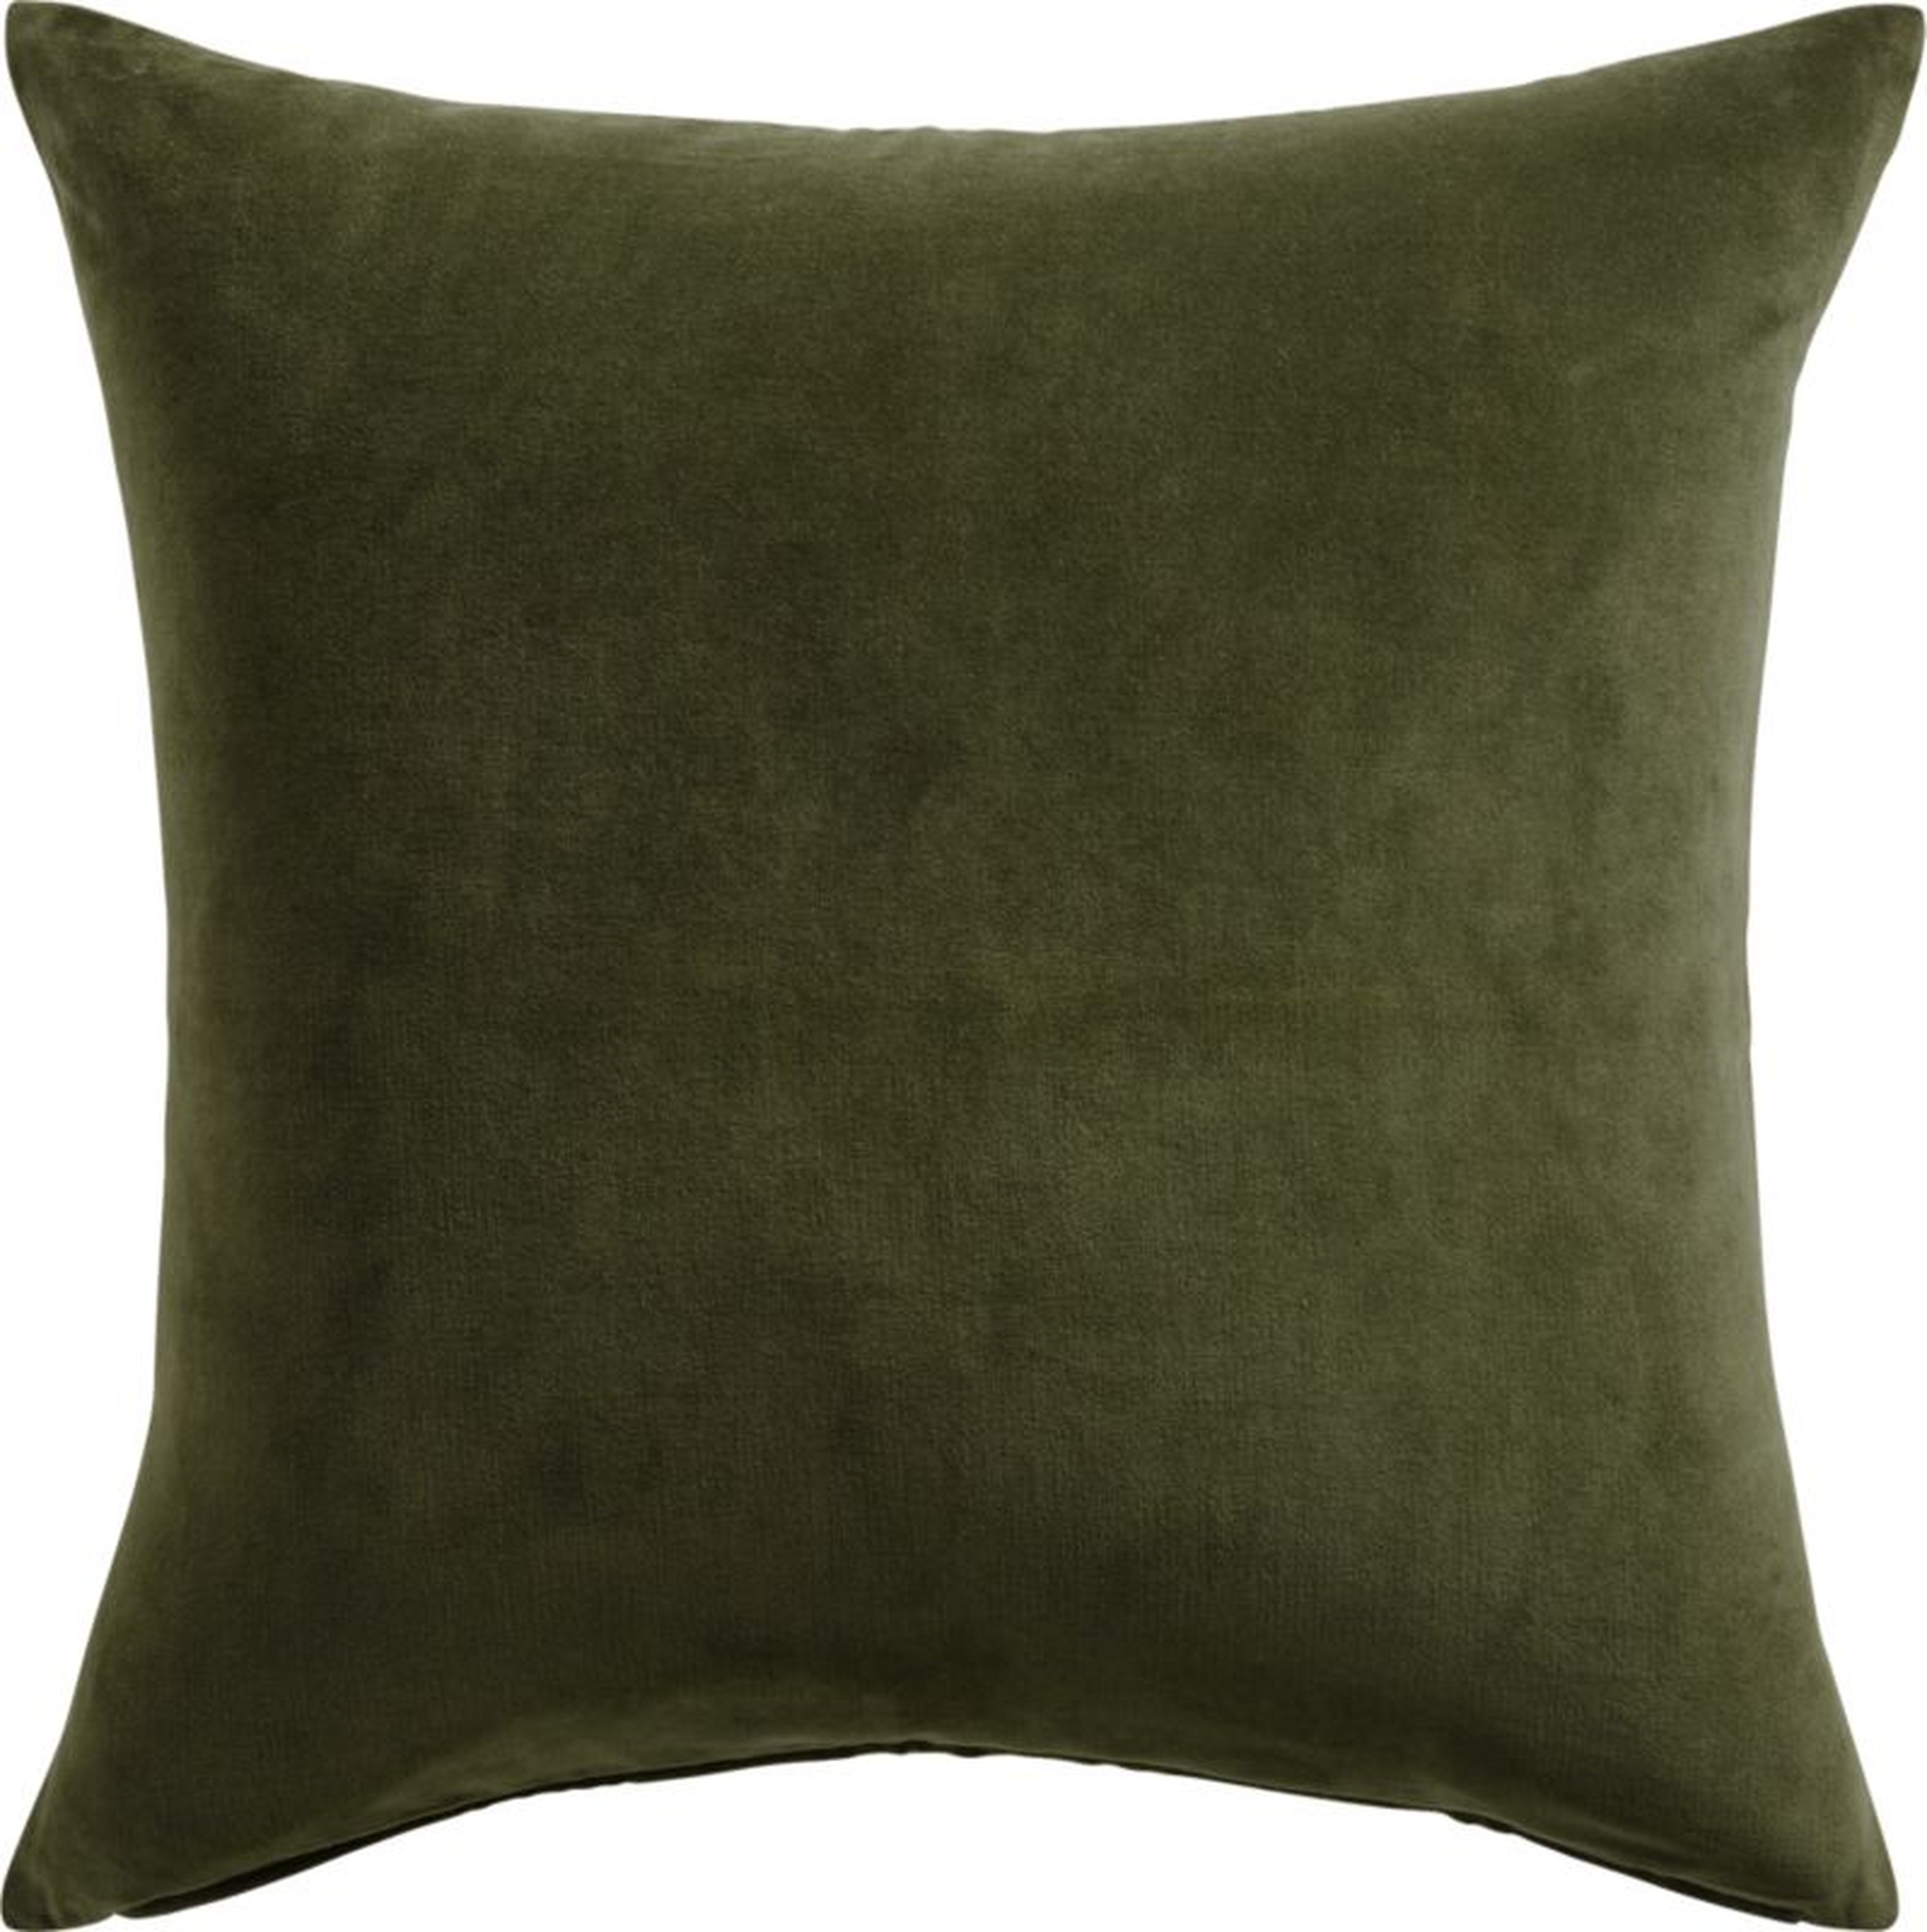 Leisure Pillow with Feather-Down Insert, Olive Green, 23" x 23" - CB2